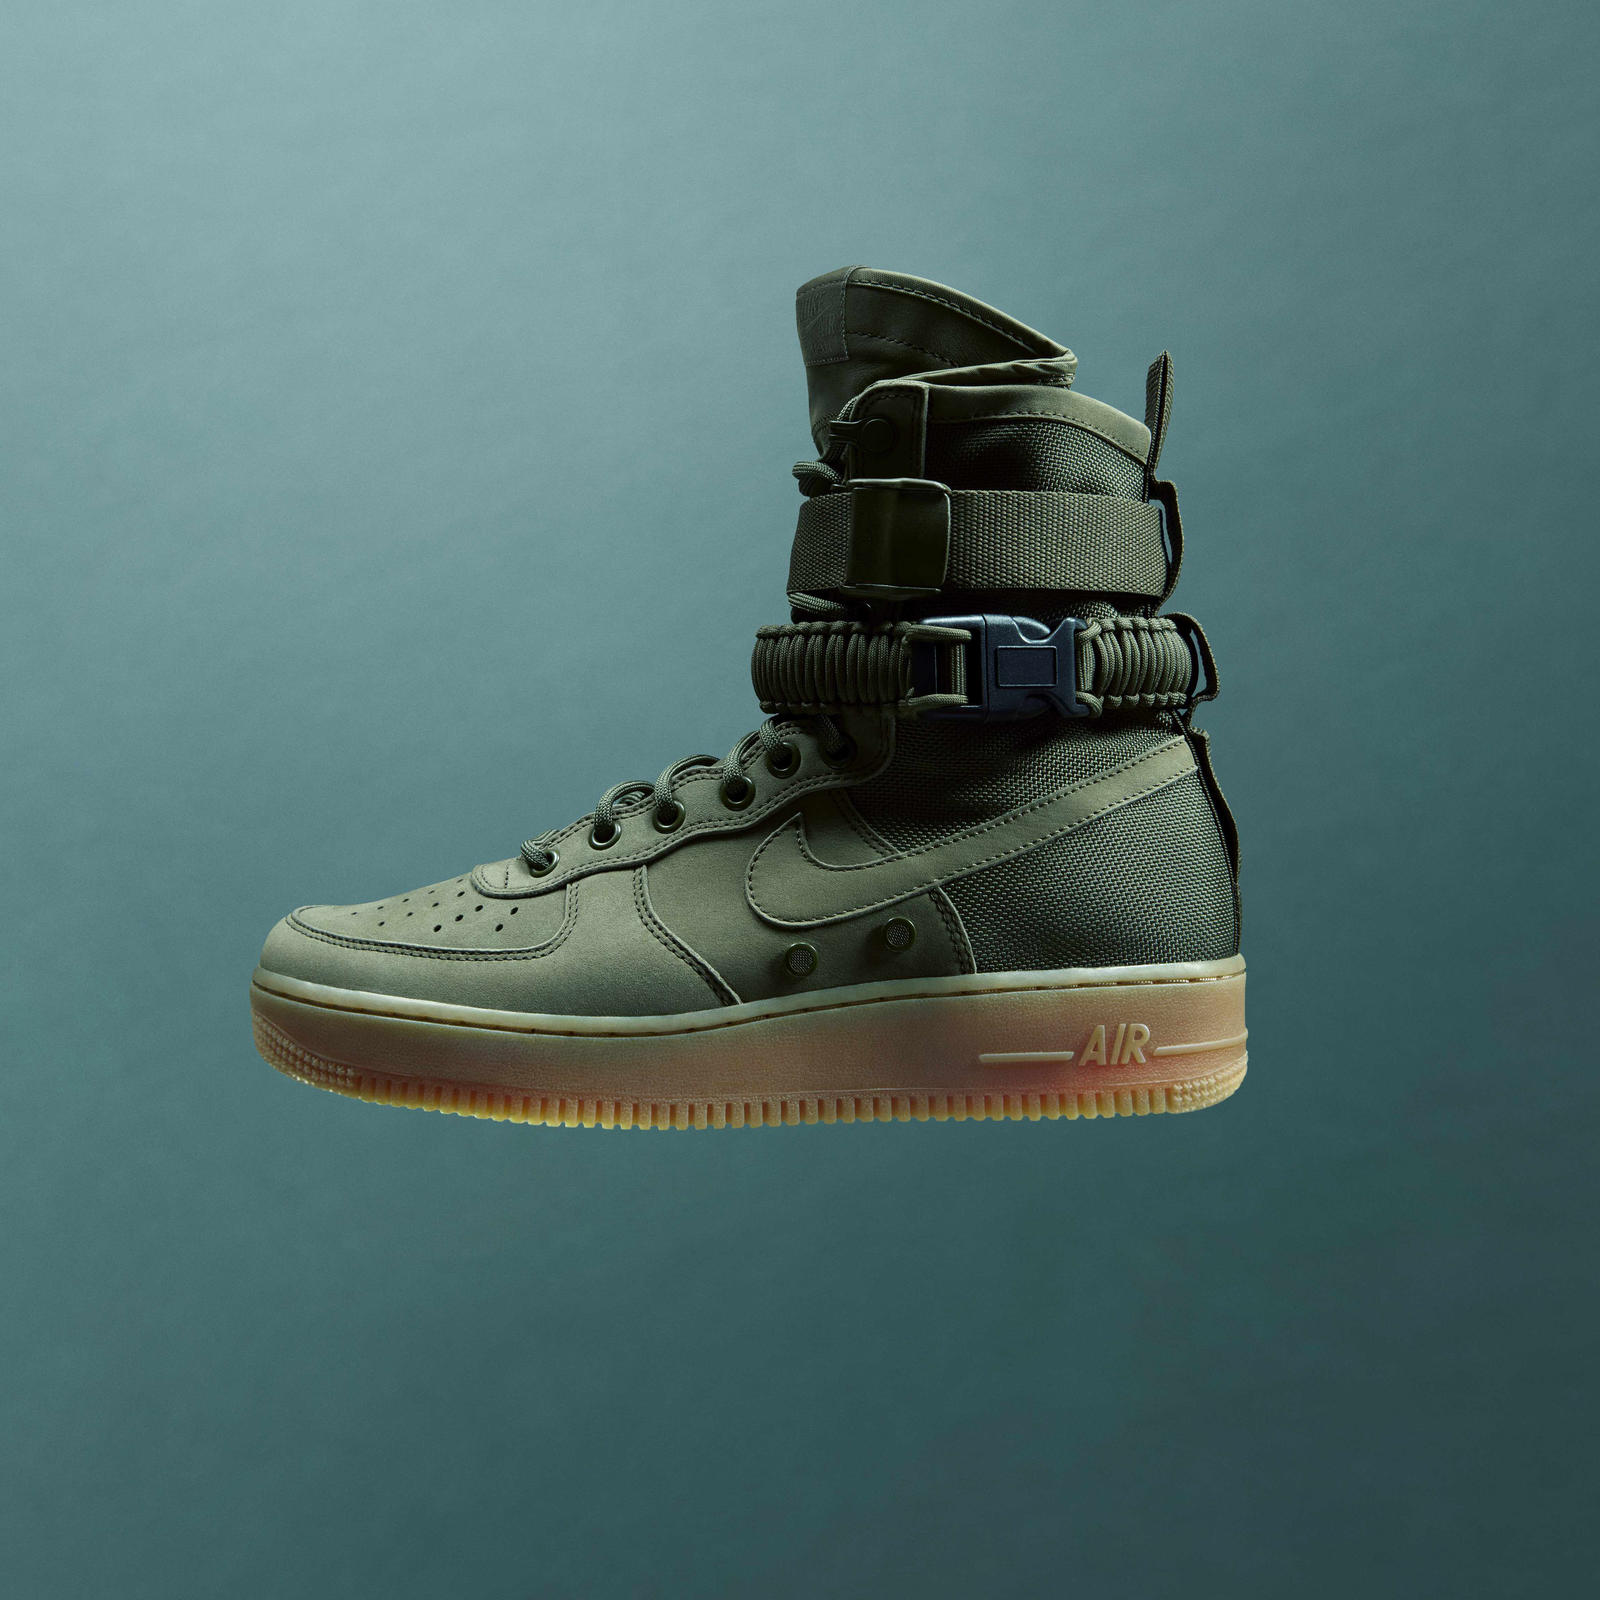 The New Generation of Force - The Special Field Air Force 1 ...